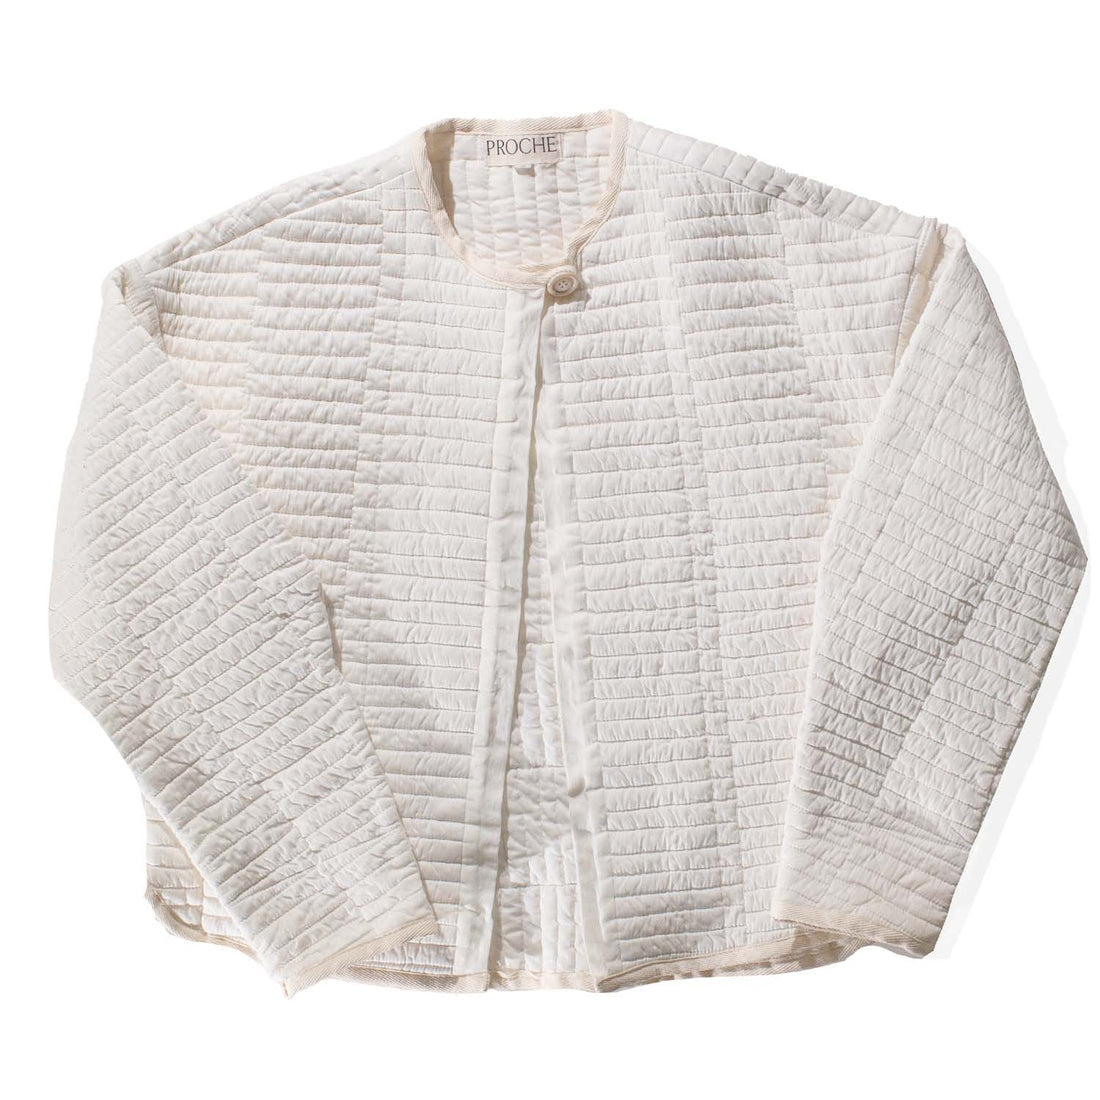 Proche Quilted Olivia Jacket in Ivory